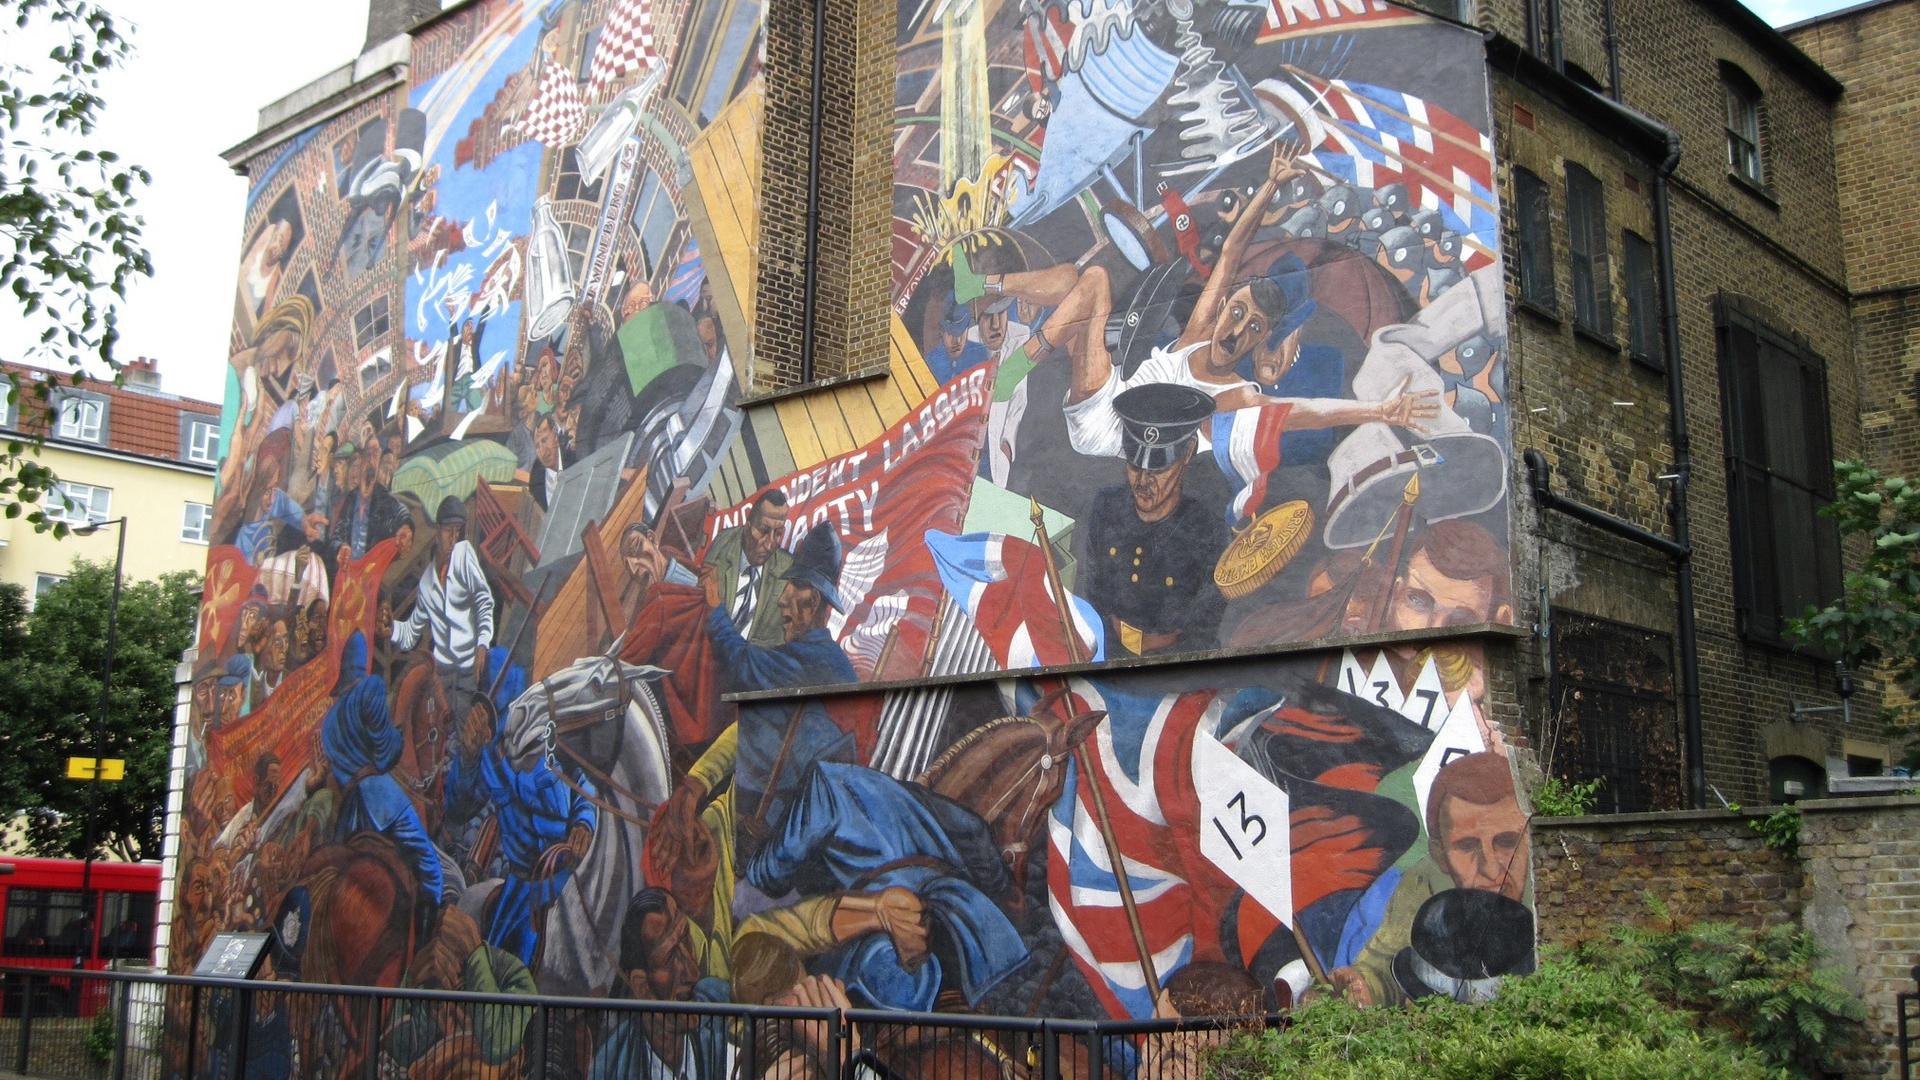 A modern mural commemorating the Cable Street riot